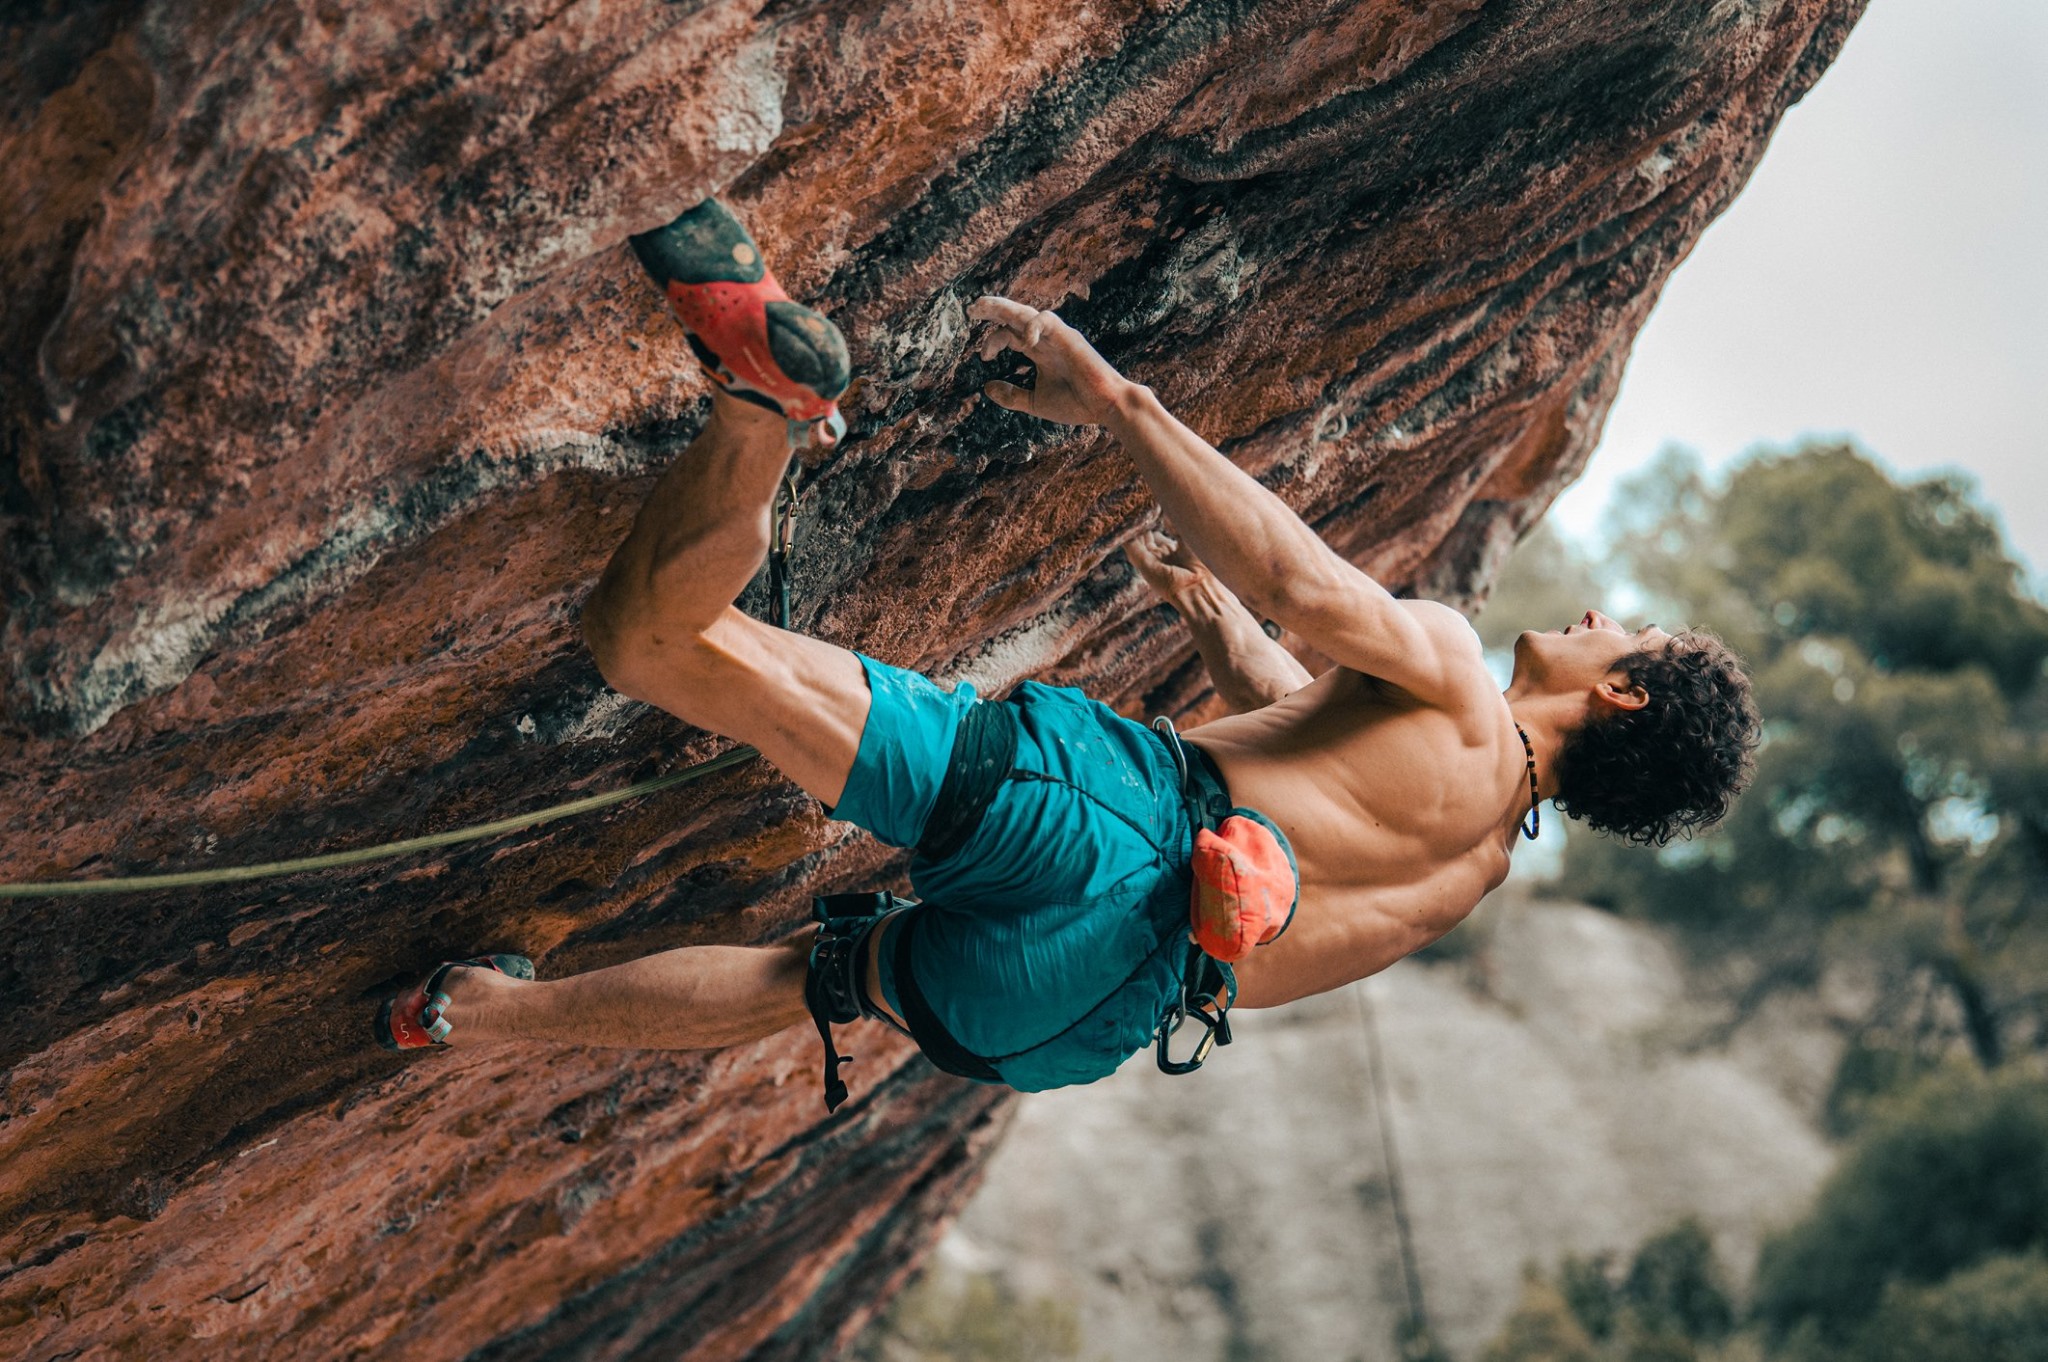 Adam Ondra Attempting Potential 5.15d in Spain - Gripped Magazine